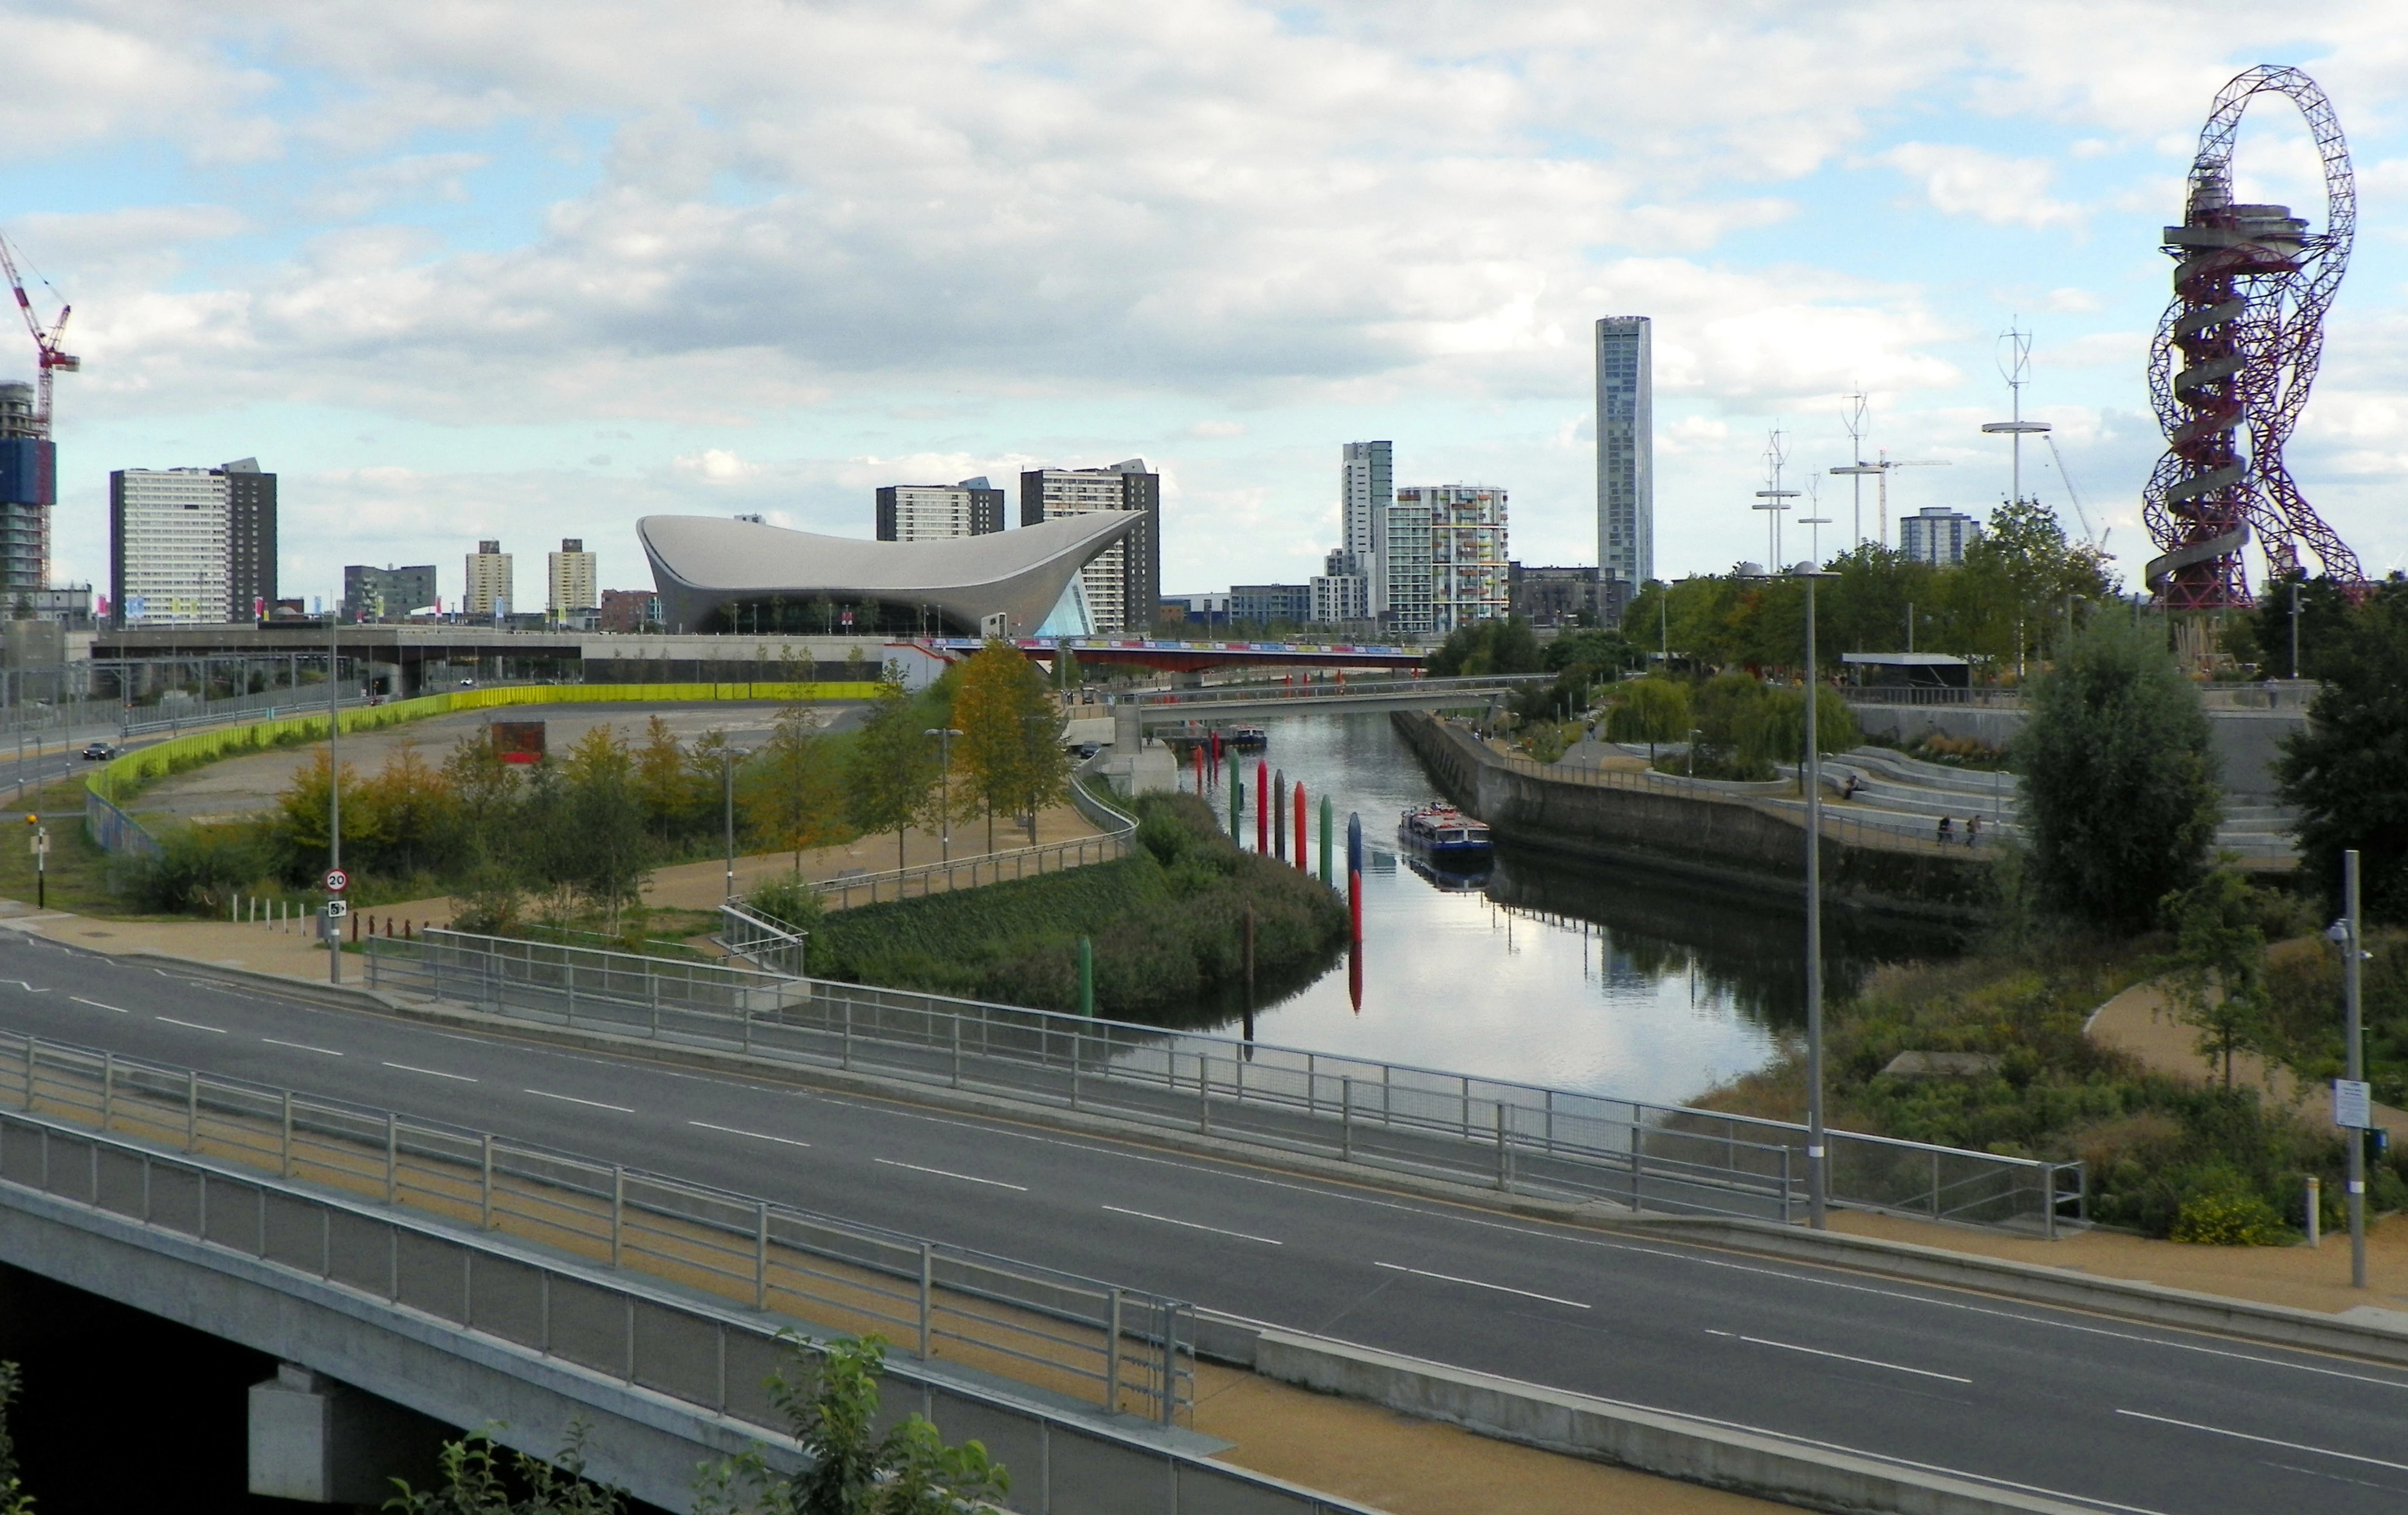 GOC Walthamstow to Stratford 223: River Lea and Queen Elizabeth Olympic Park